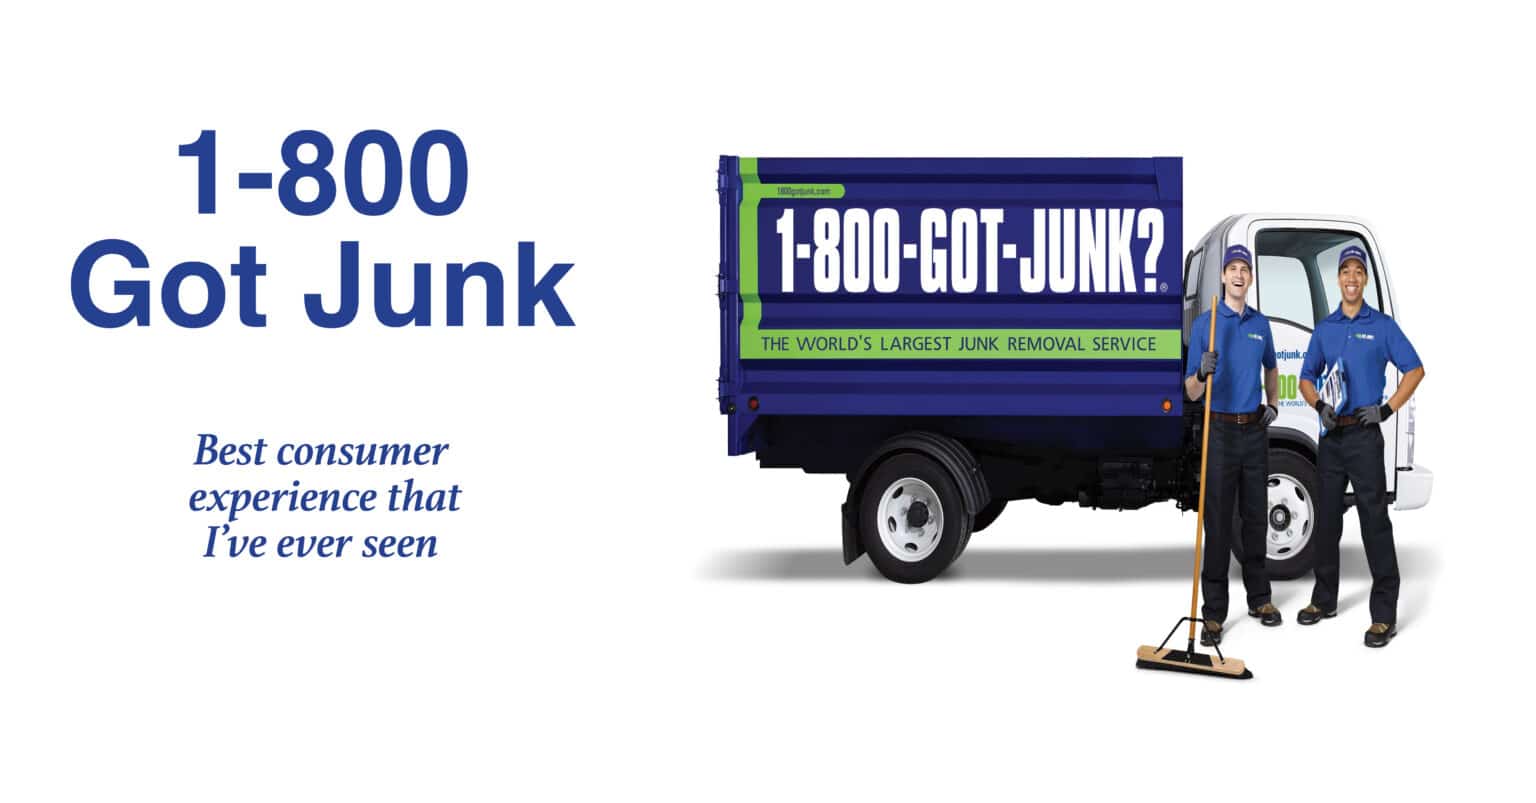 1800 Got Junk is the best consumer experience have ever seen